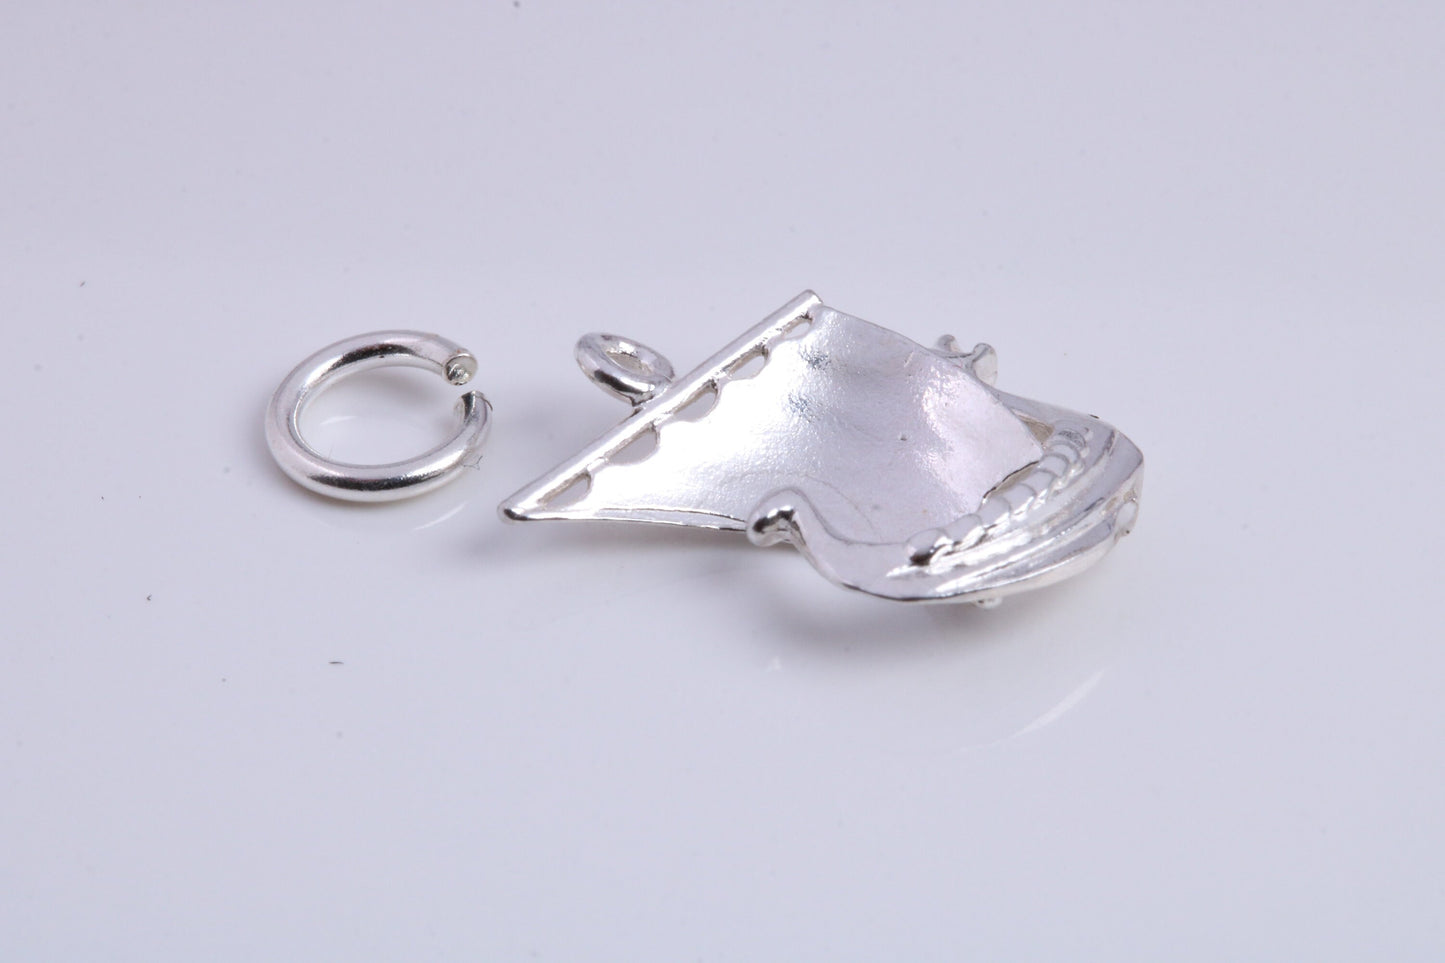 Viking Boat Charm, Traditional Charm, Made from Solid 925 Grade Sterling Silver, Complete with Attachment Link